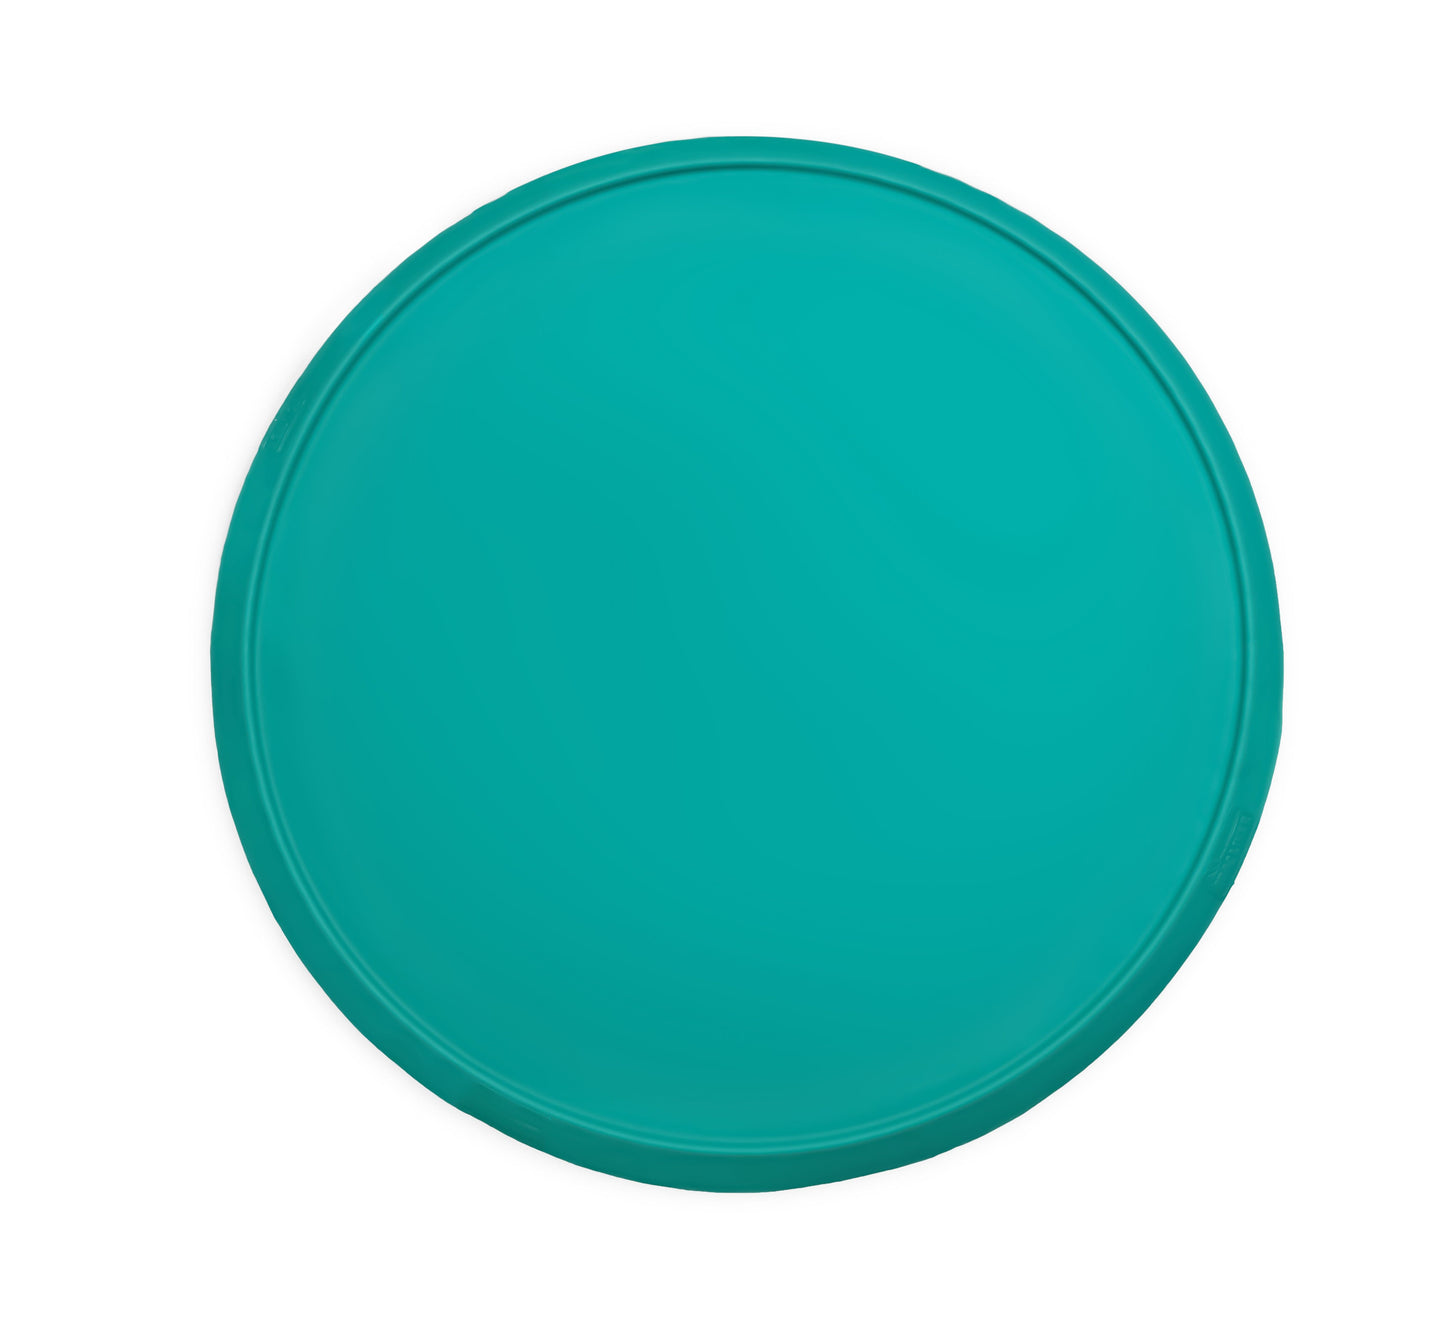 Everything Mat® Christmas Tree Mat in teal